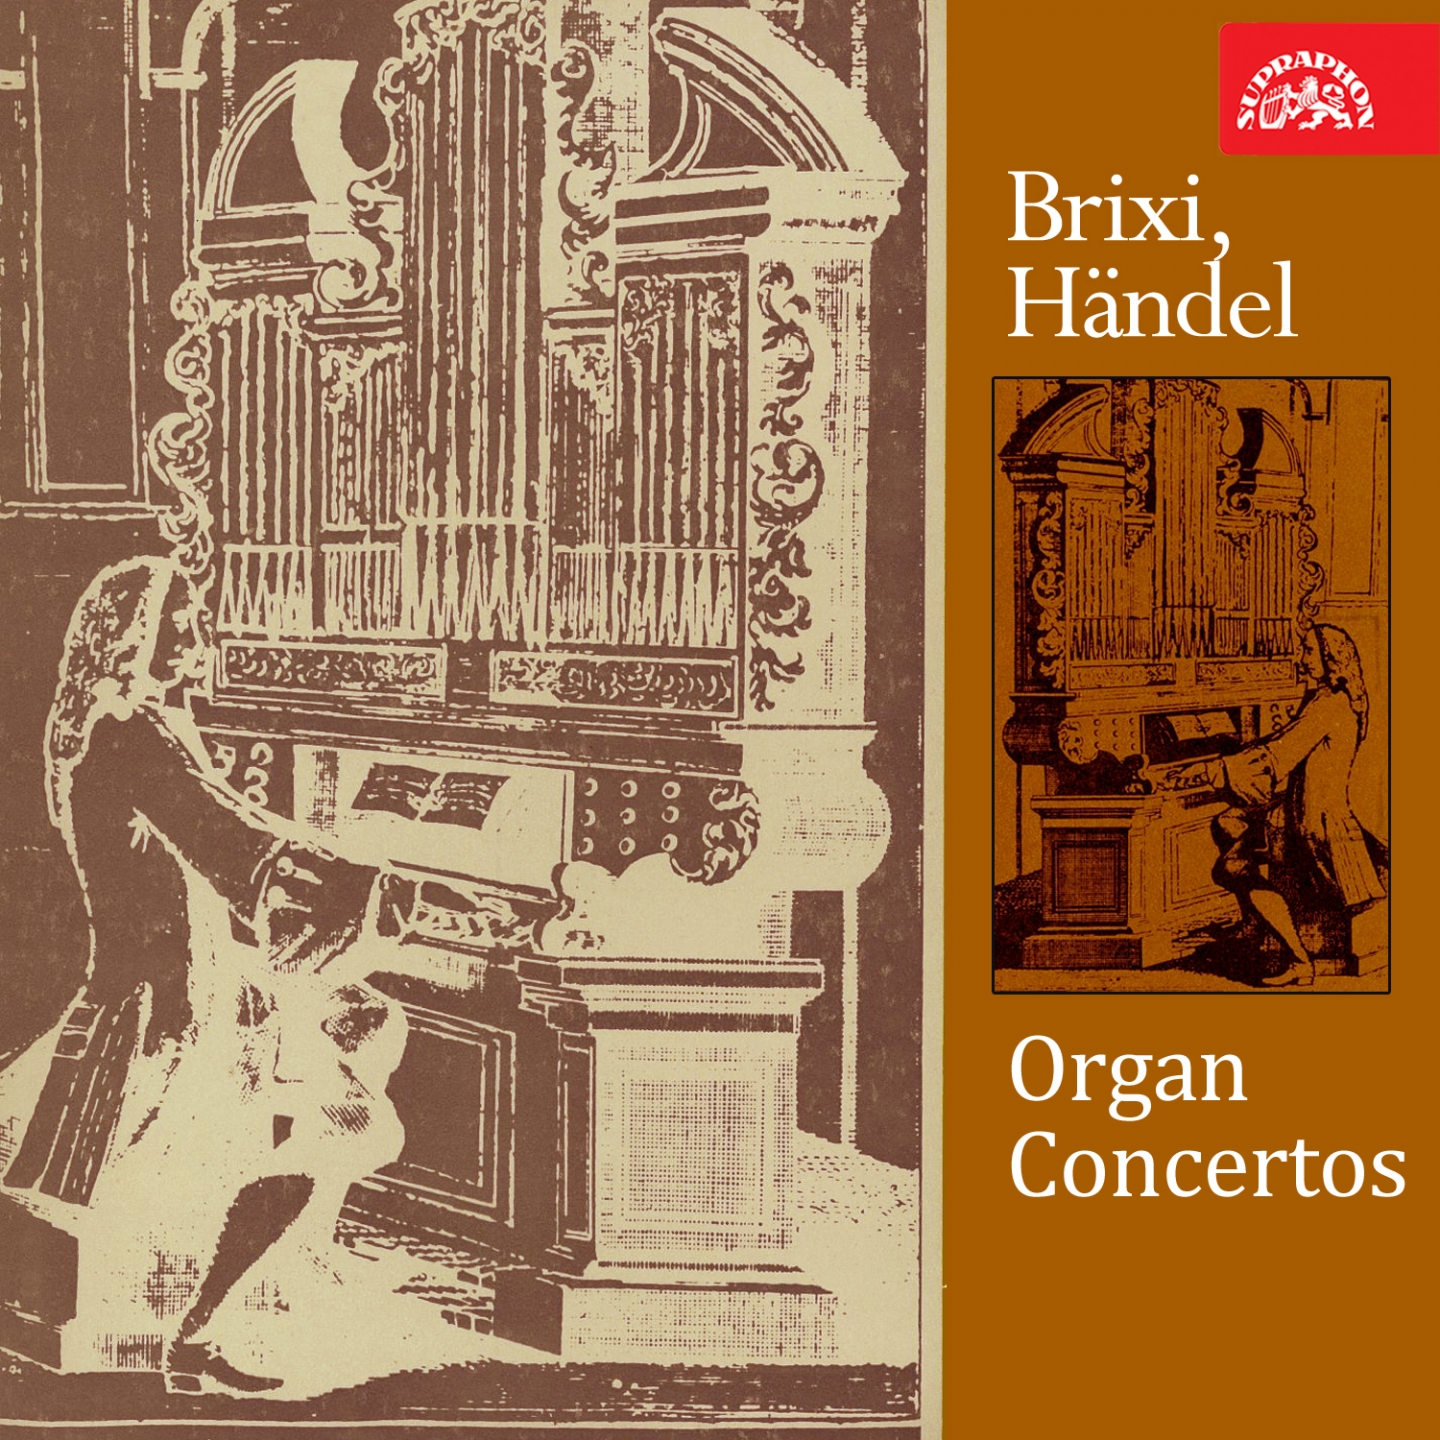 Concerto for Organ and Orchestra No. 4, Op. 4, .: I. Allegro